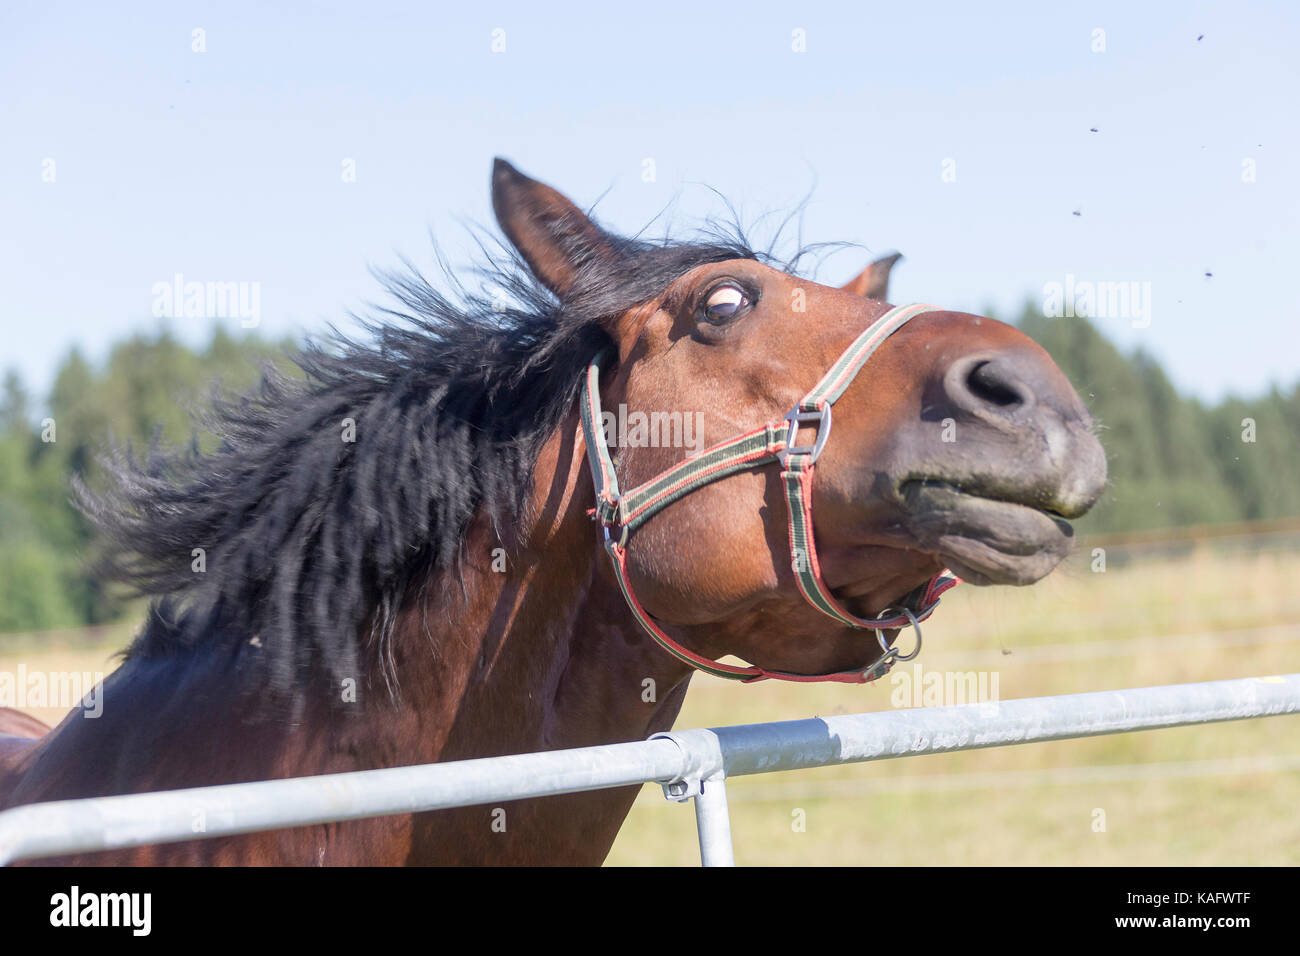 Warmblood. Bay horse chasing insects away, shaking its head. Germany Stock Photo